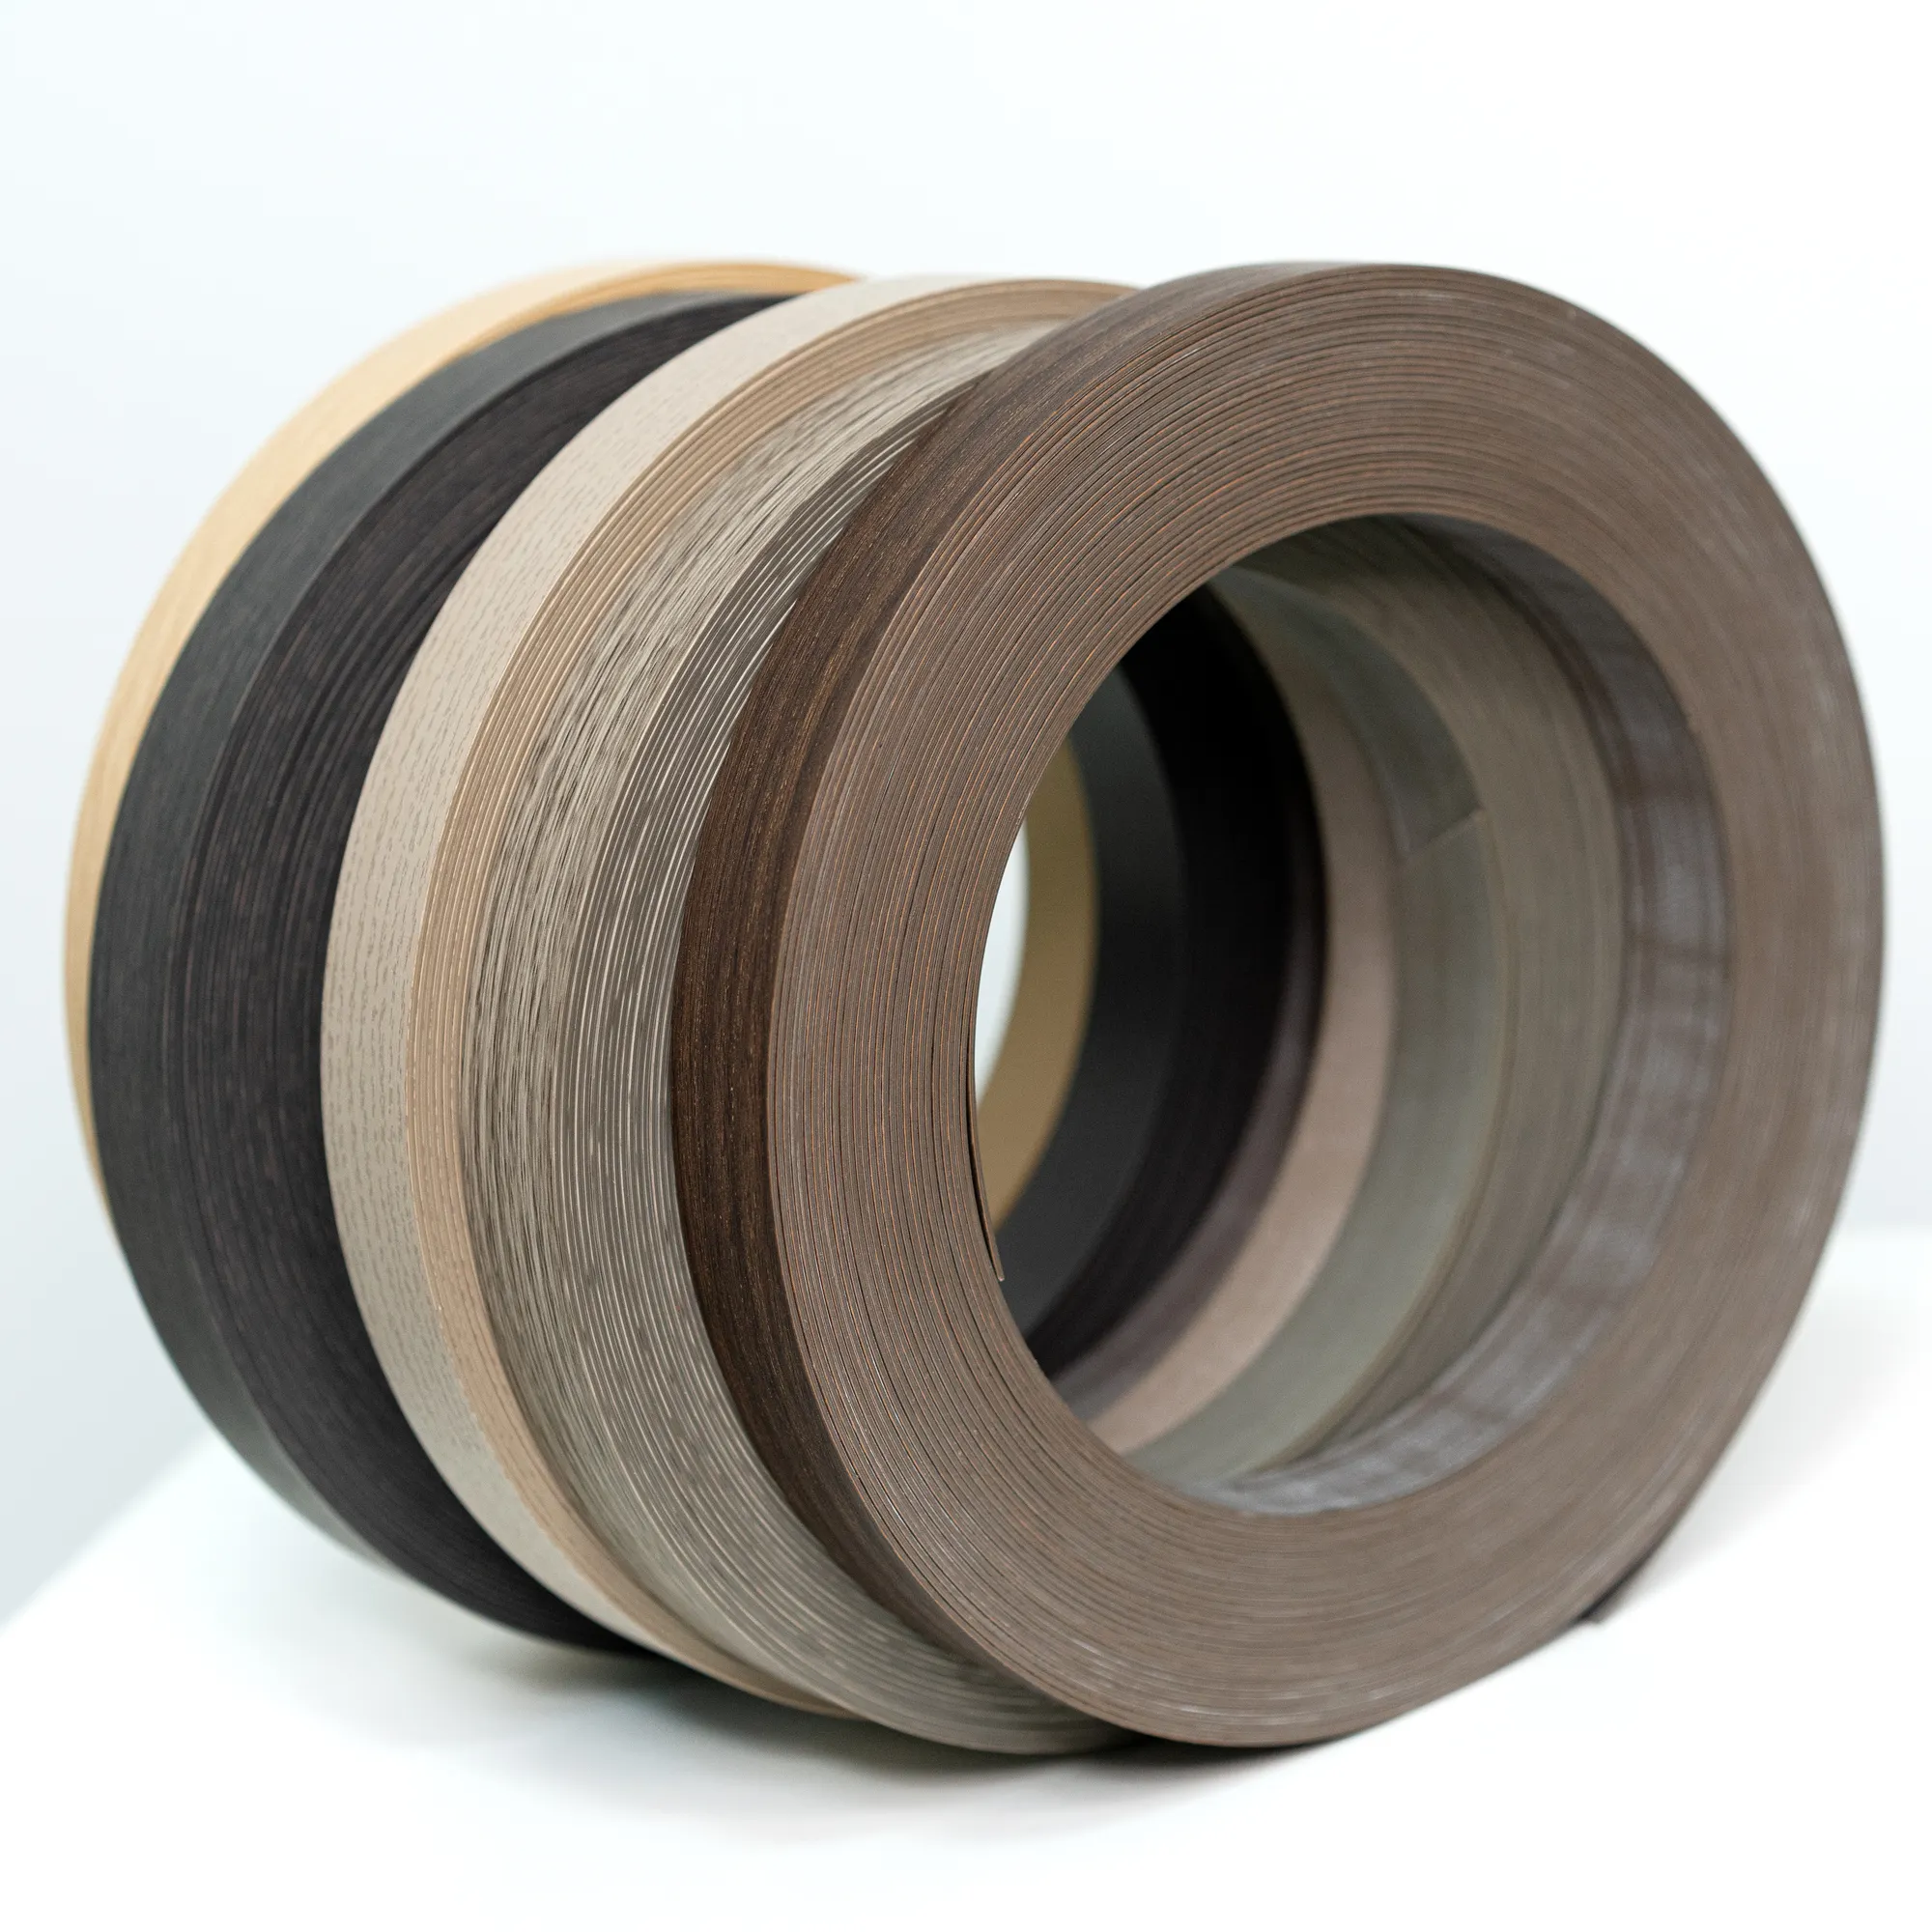 12mm-60mm Wood Edge Banding Furniture Accessories With Mdf Plate PVC/ABS Edge Banding